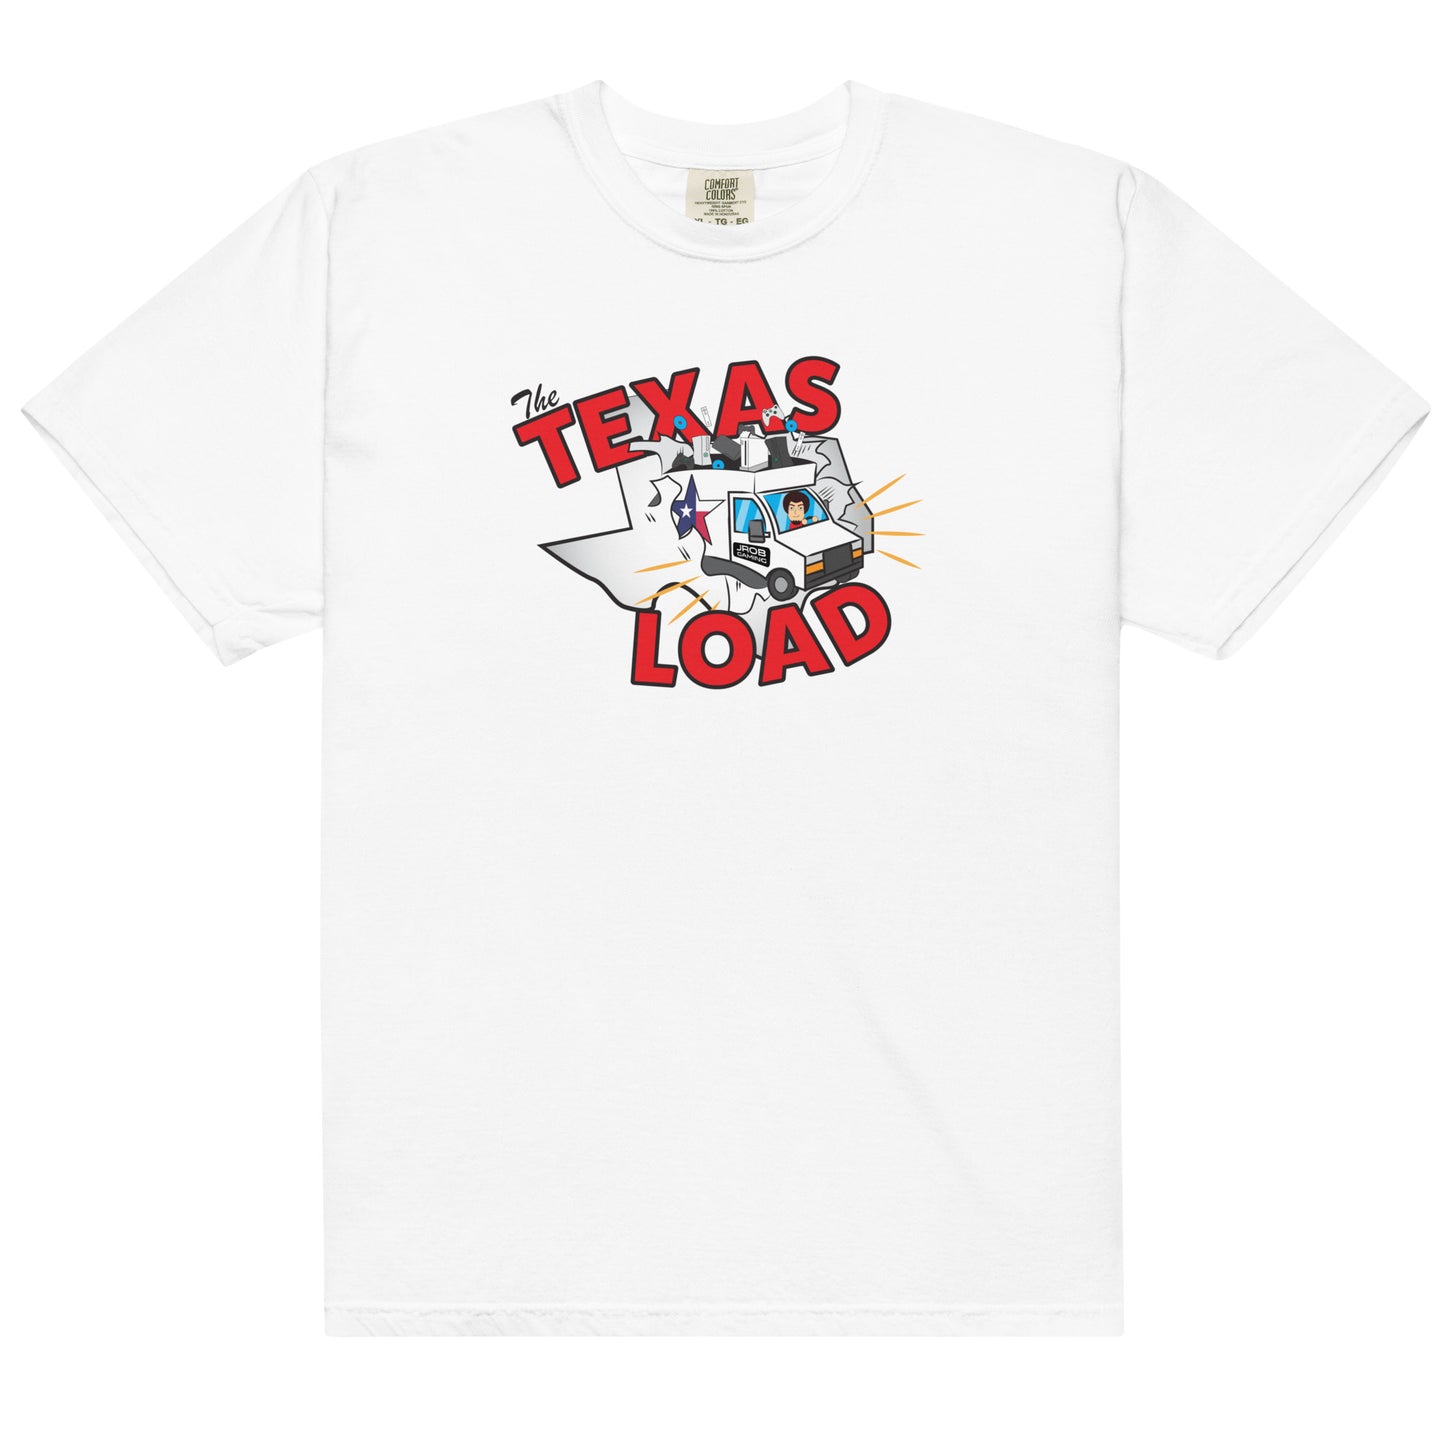 The Texas Load T-Shirt